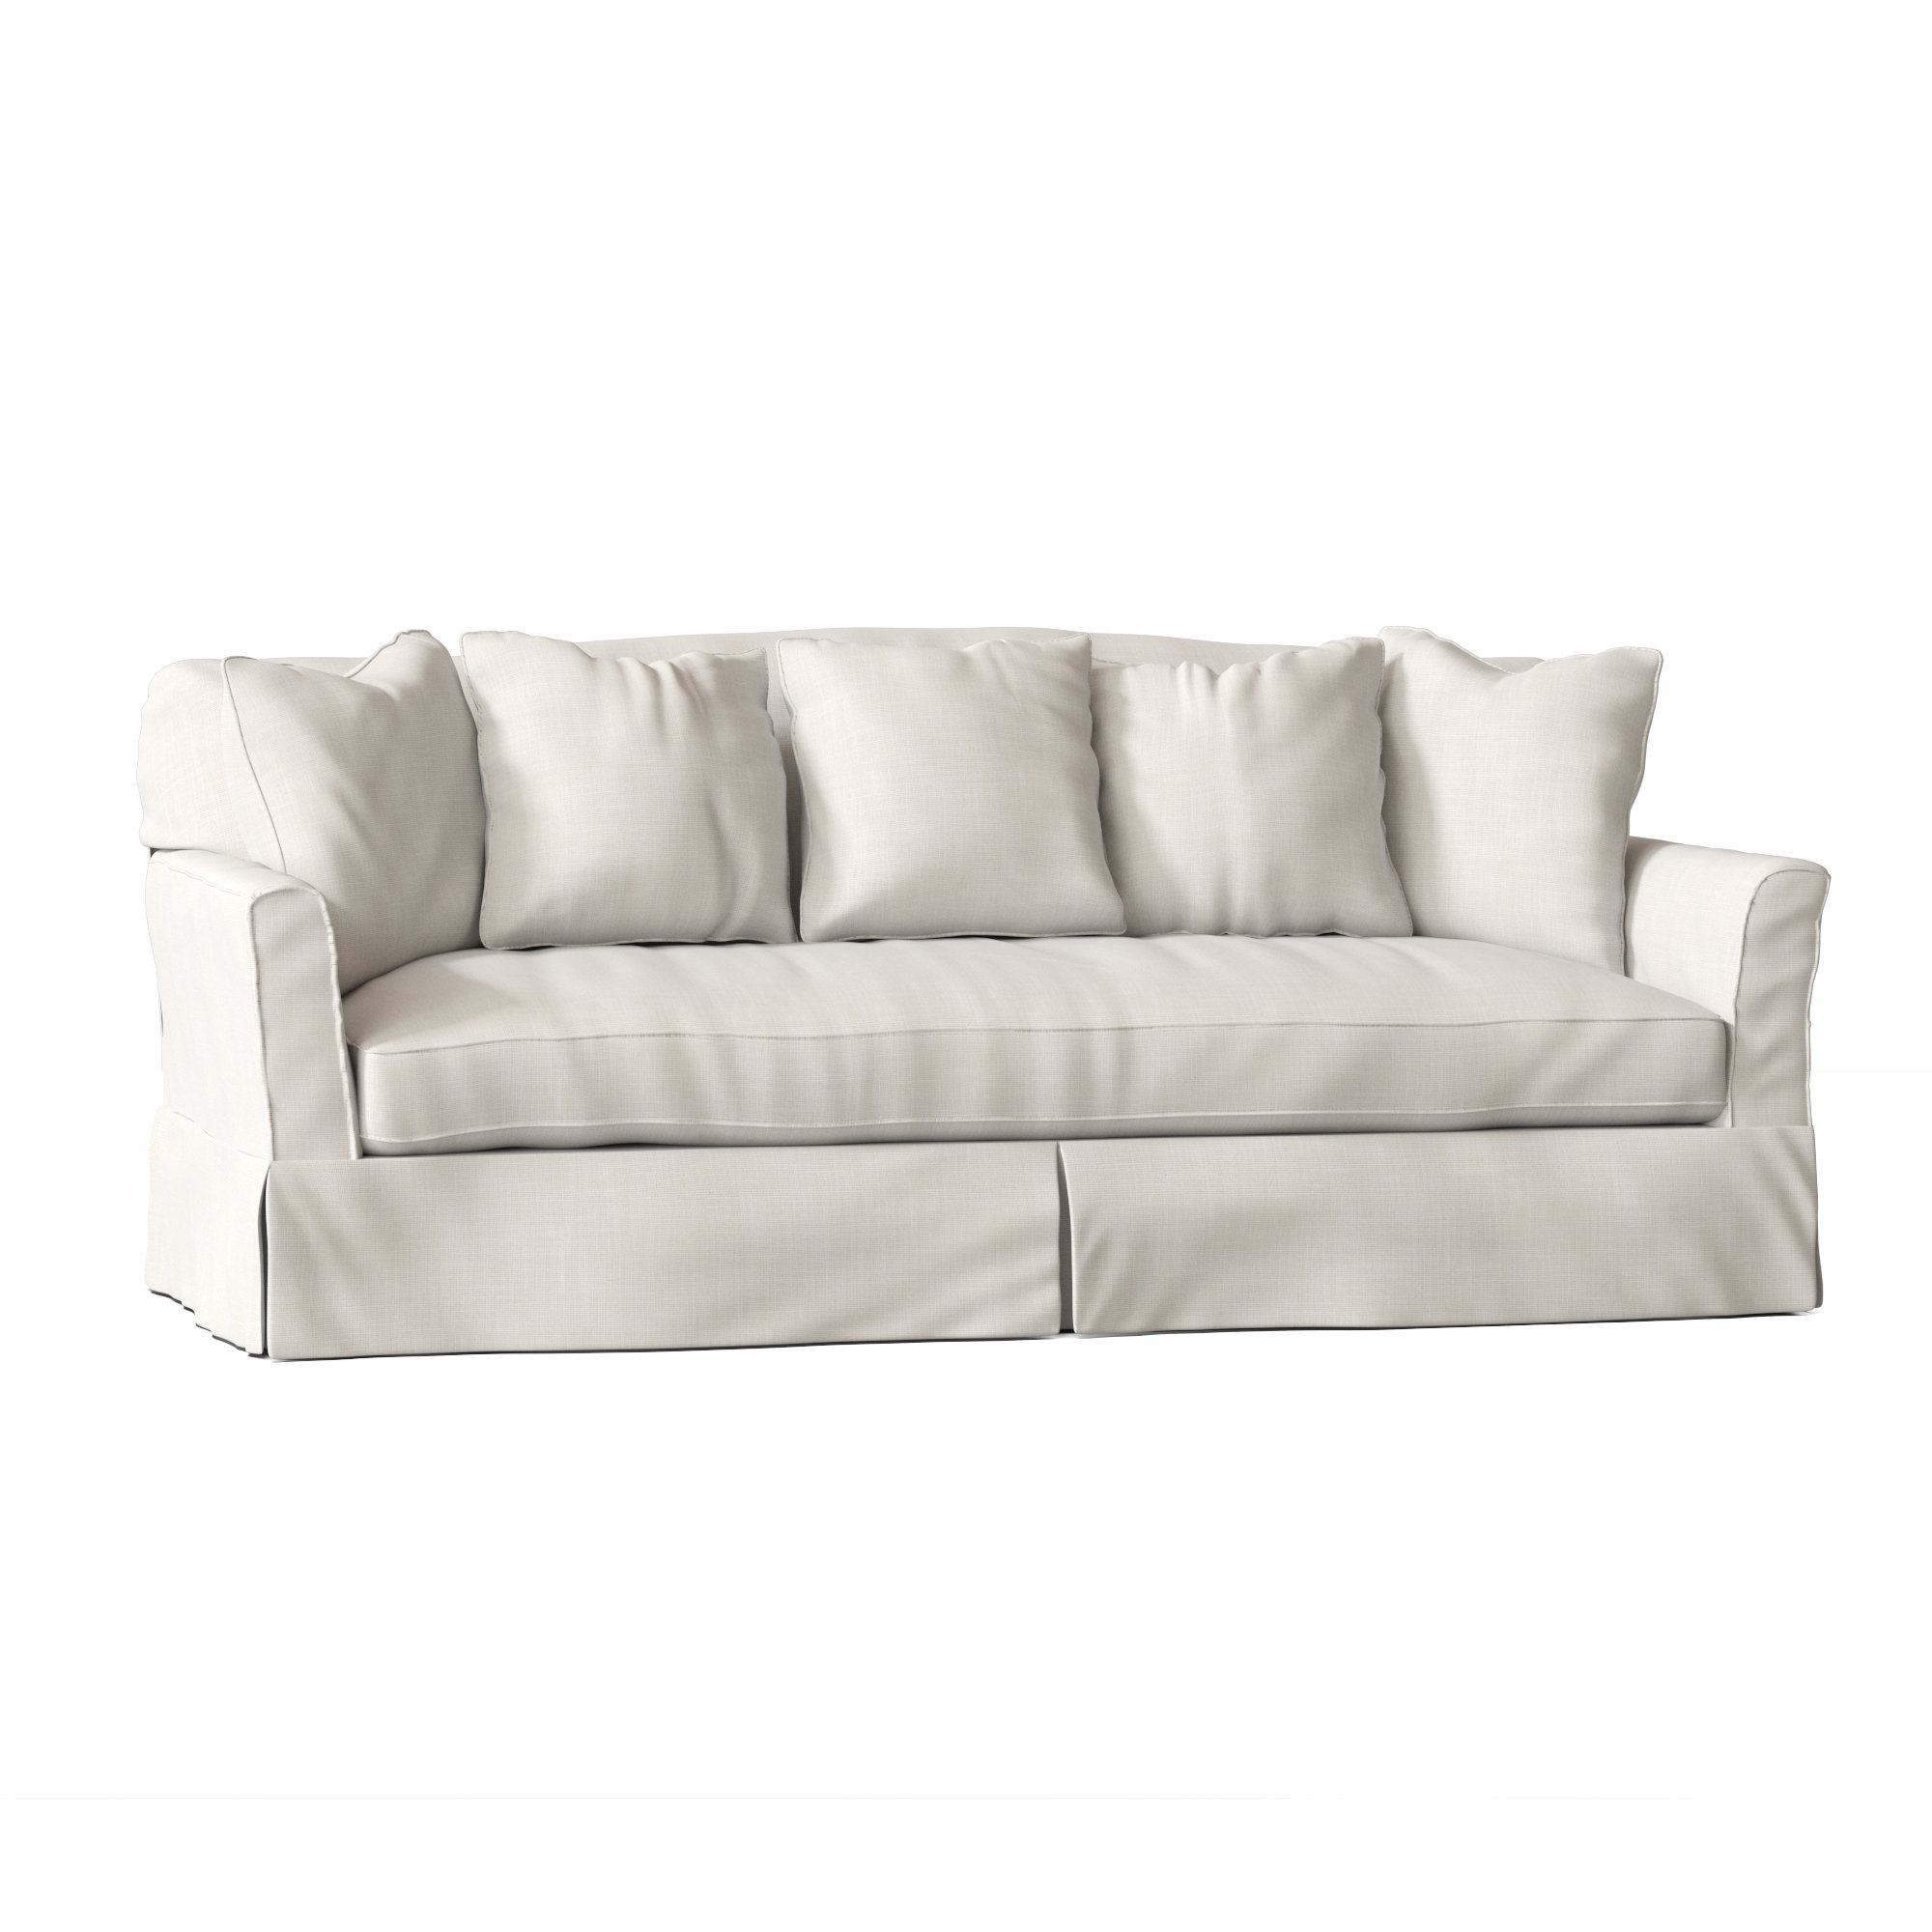 Fairchild 90” Flared Arm Slipcovered Sofa with Reversible Cushions